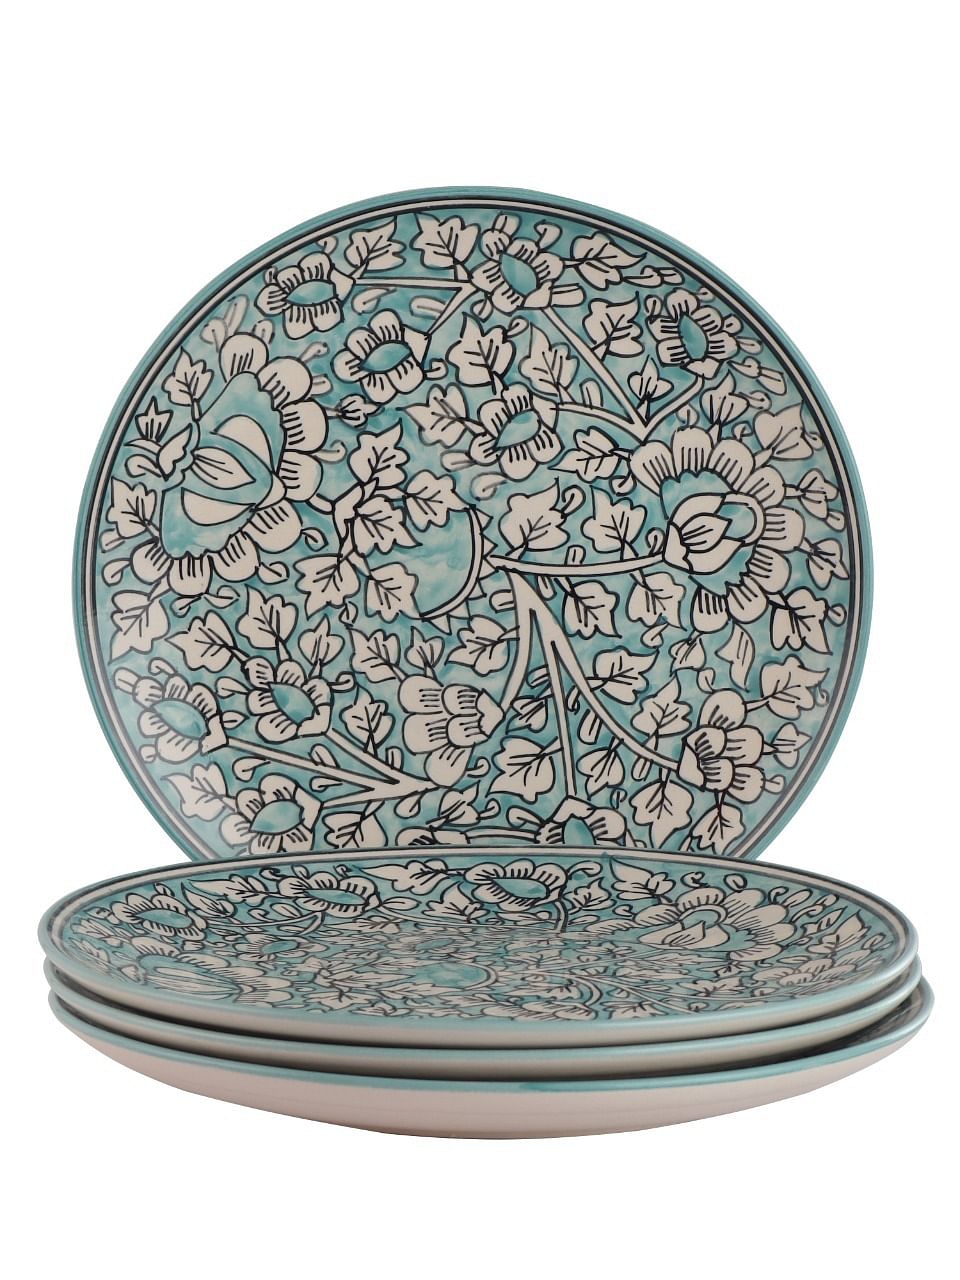 Flower-and-vine is the signature motif of Khurja pottery.